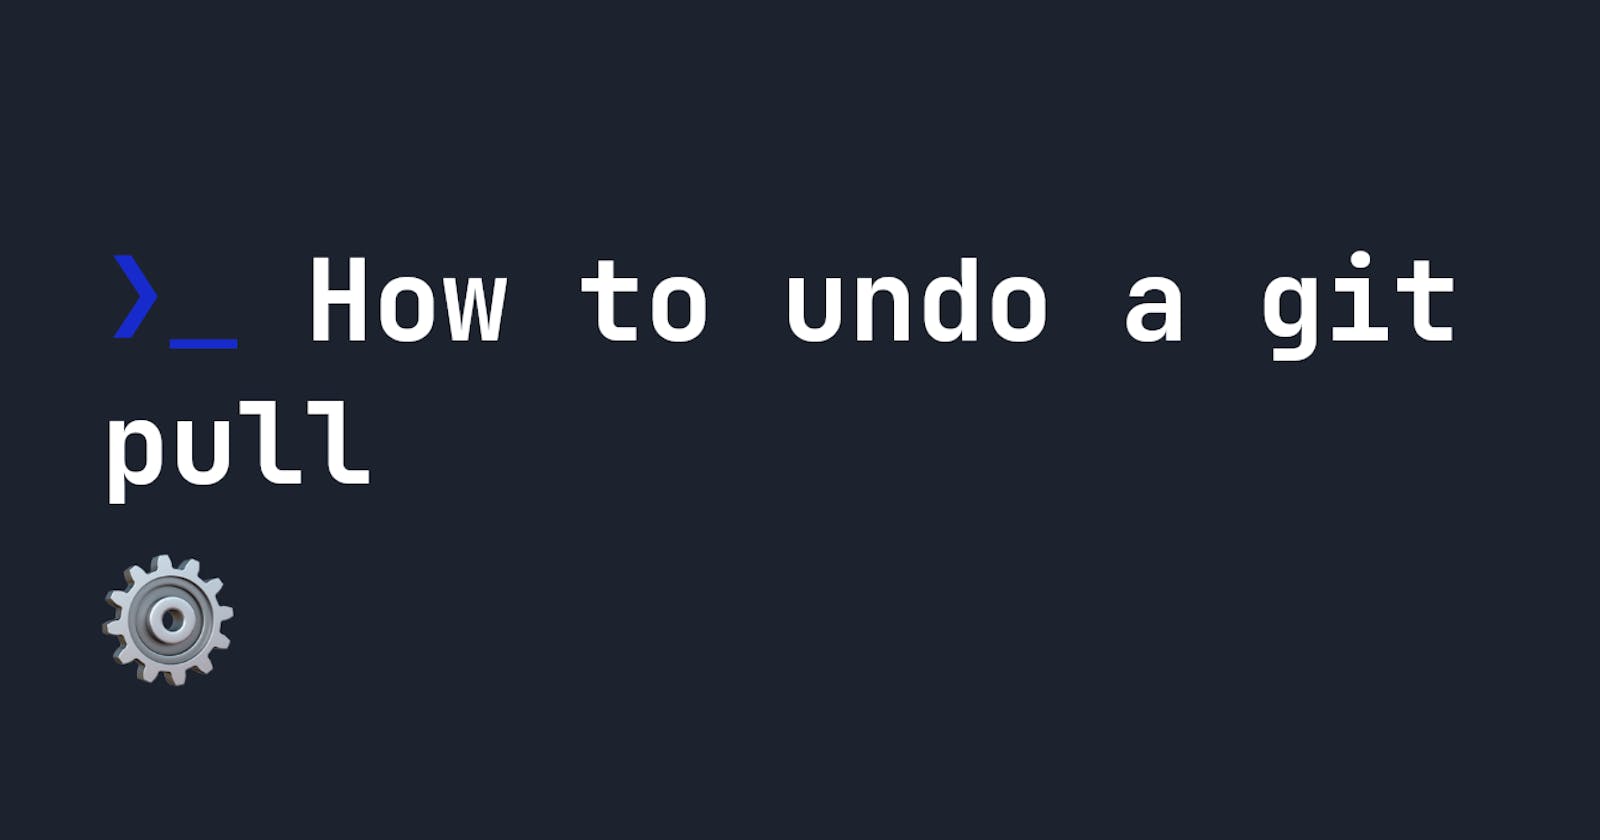 How to undo a git pull